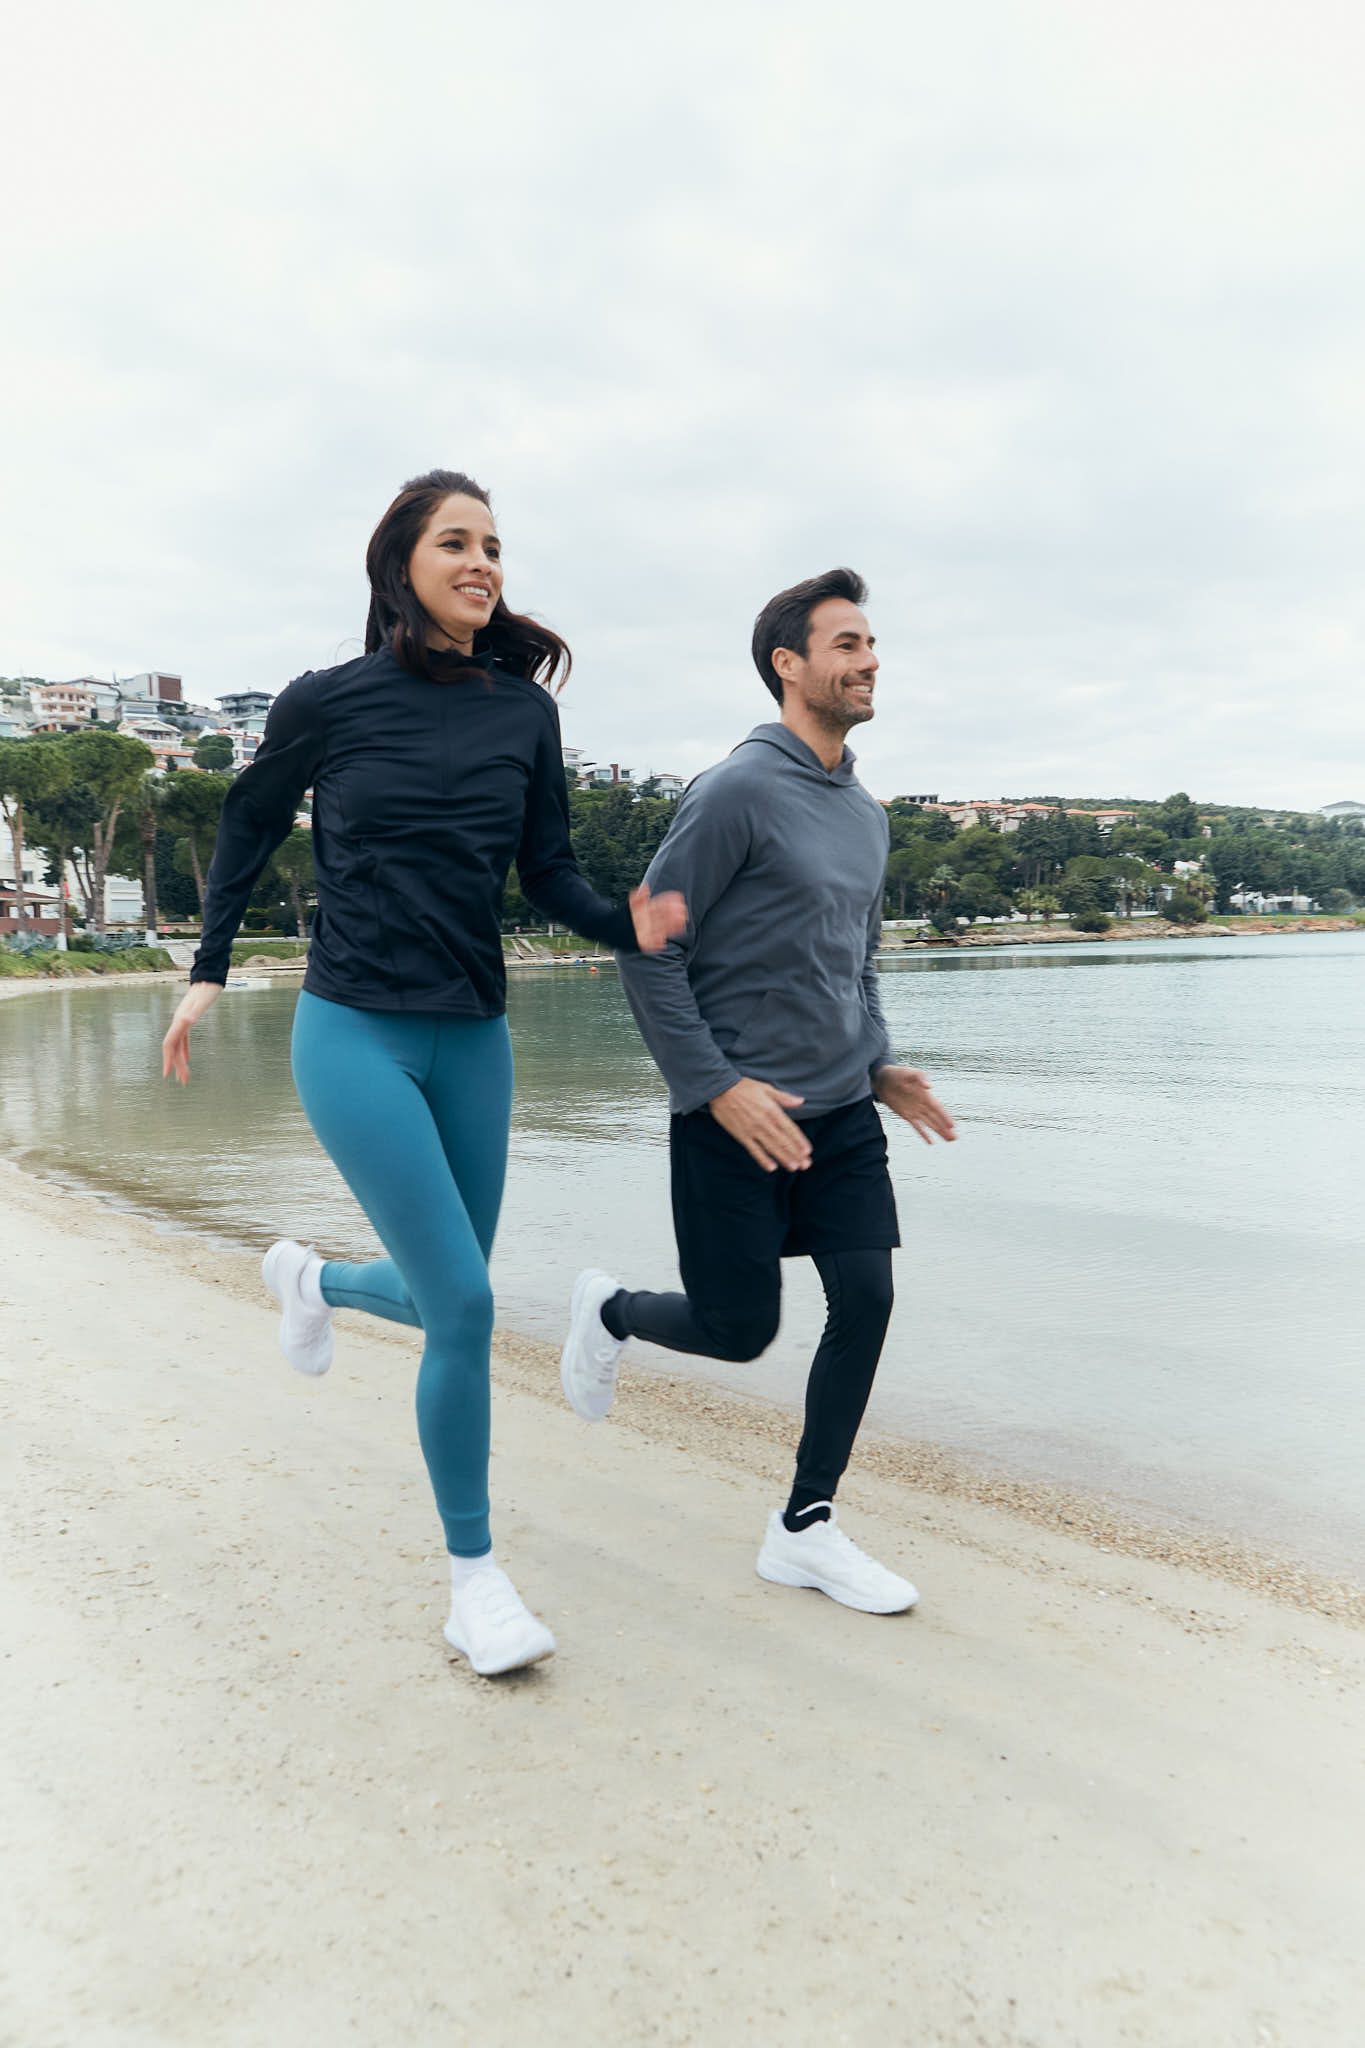 A woman and a man running in the beach.